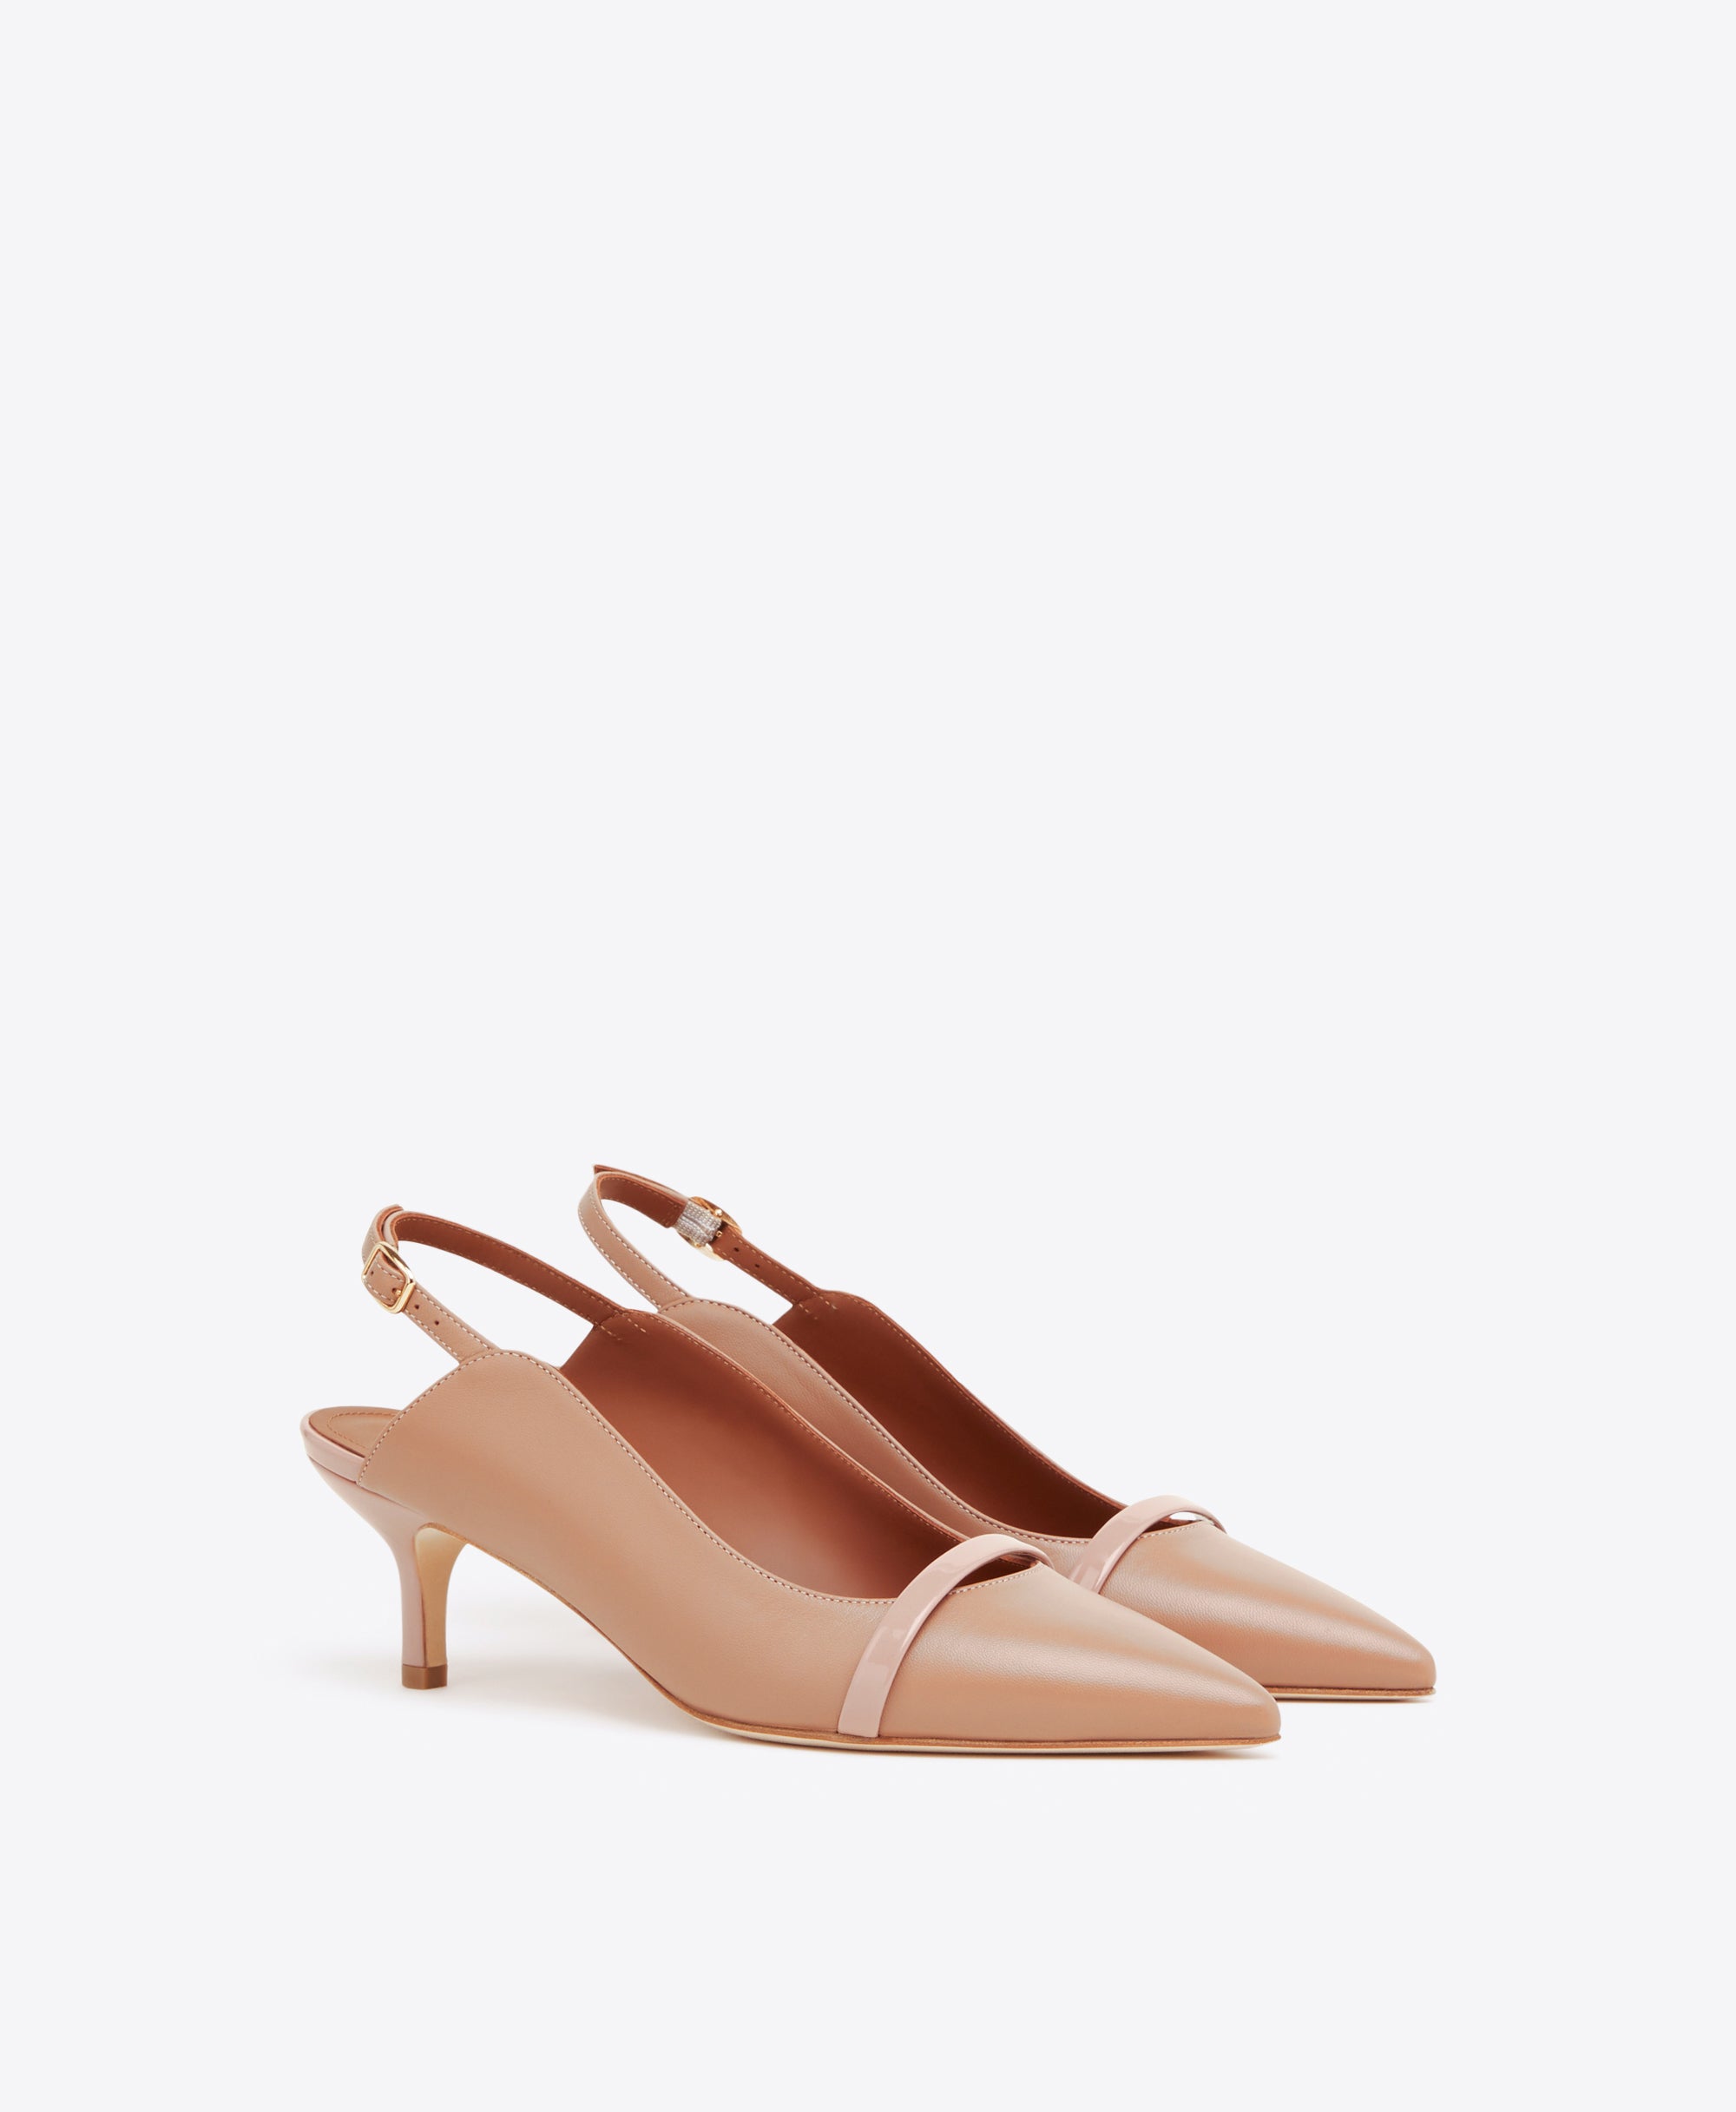 Capollini Allegra Blush Pink Nubuck Leather Slingback Heels with Bow